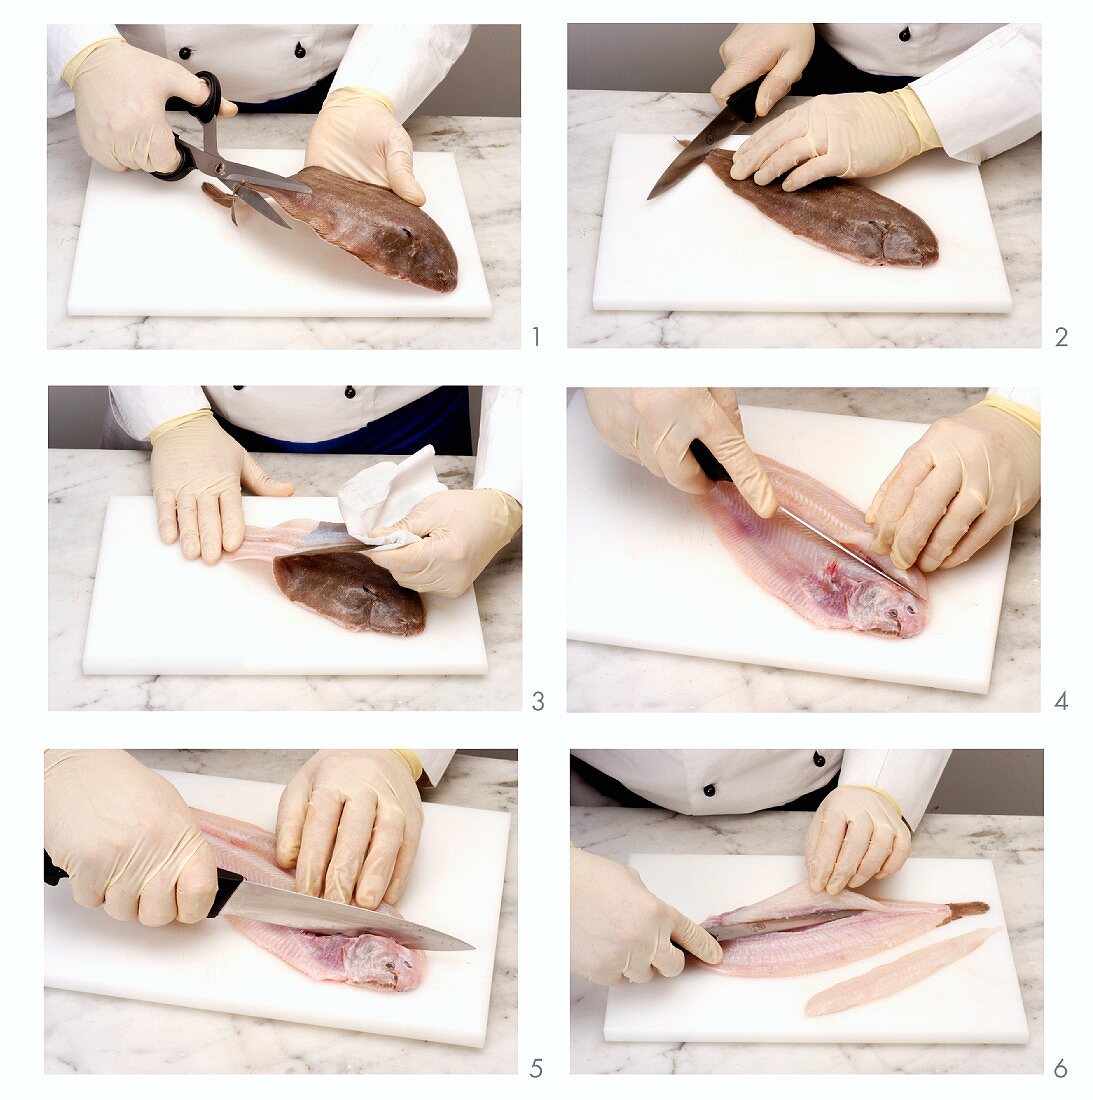 Sole being filleted